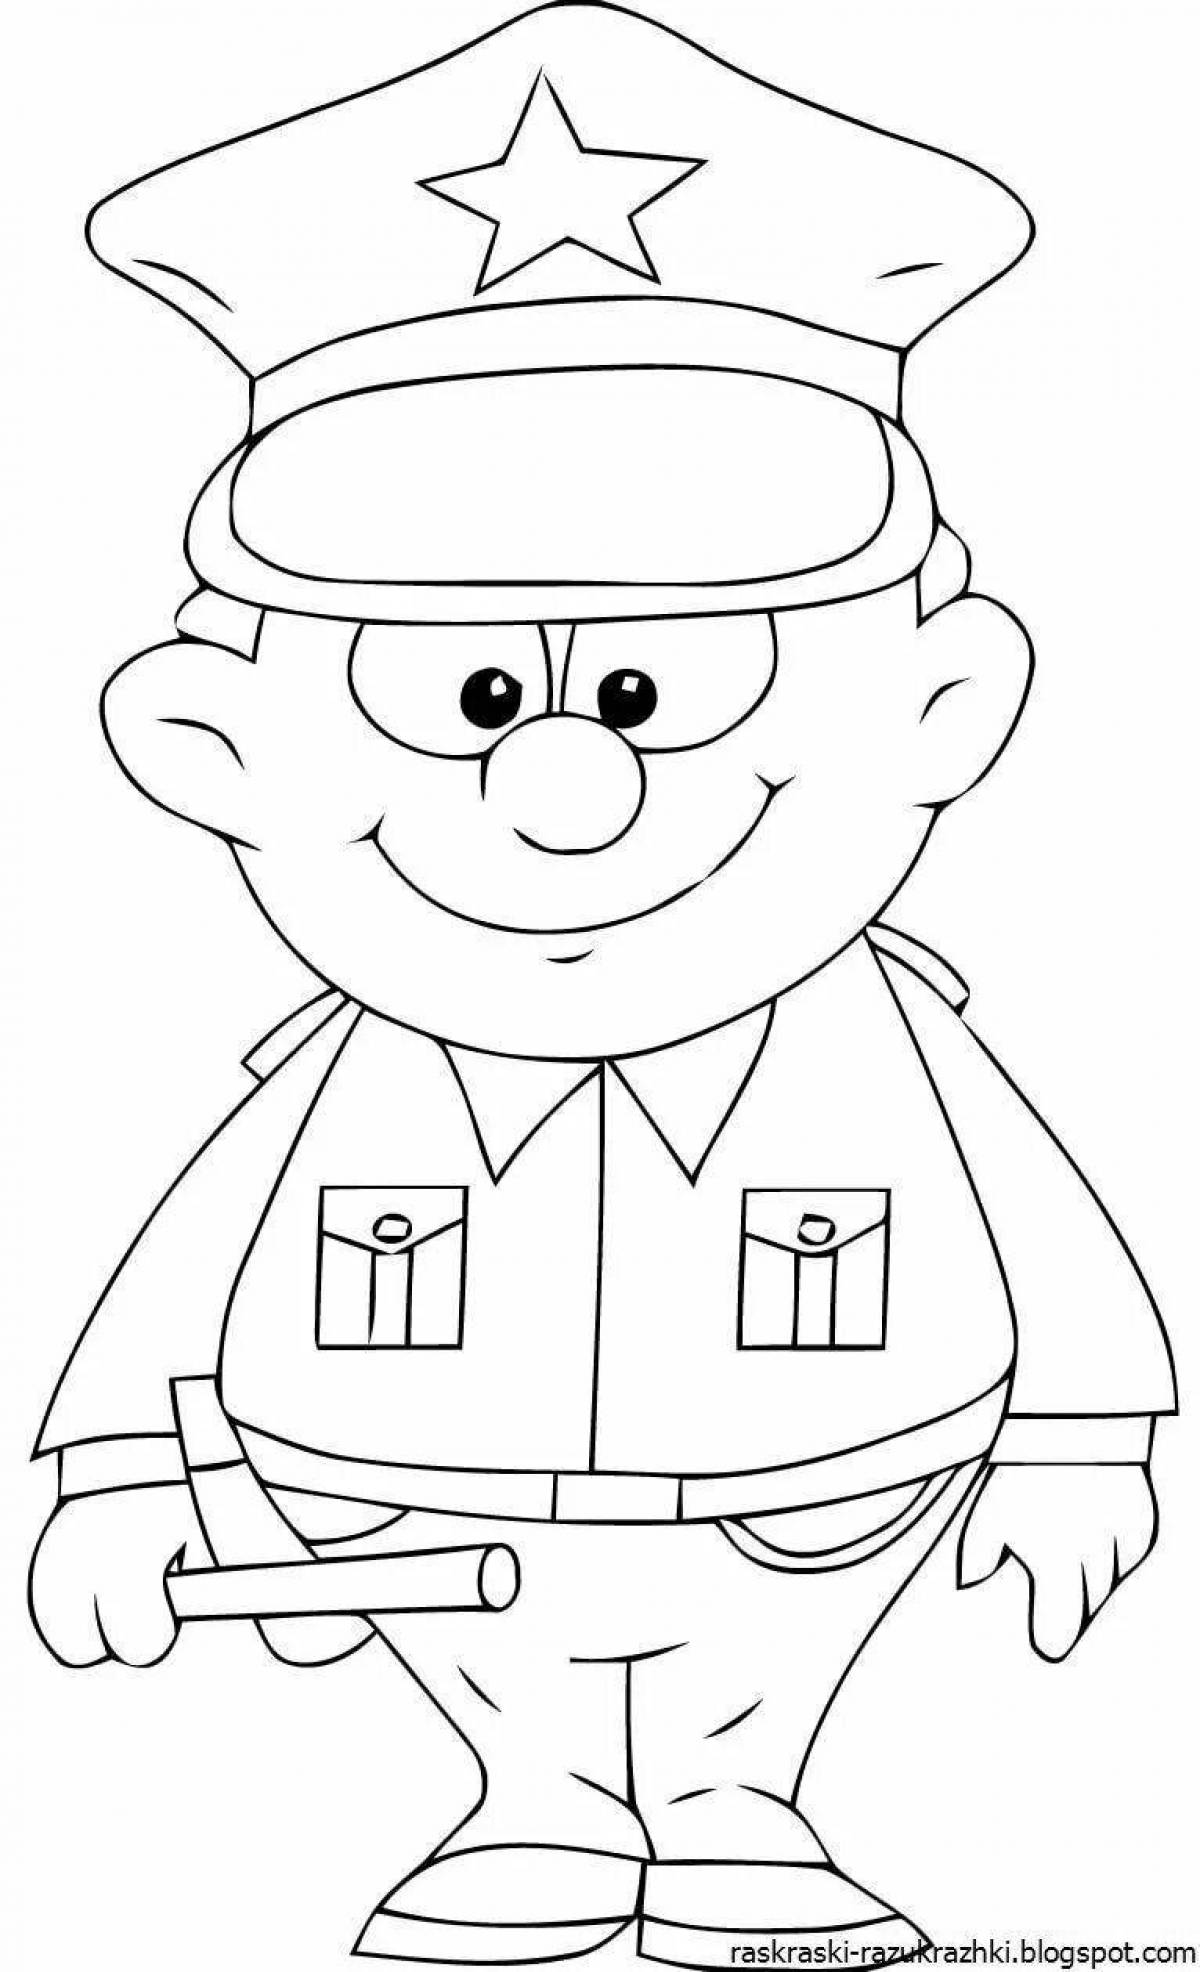 Attractive soldier coloring book for kids